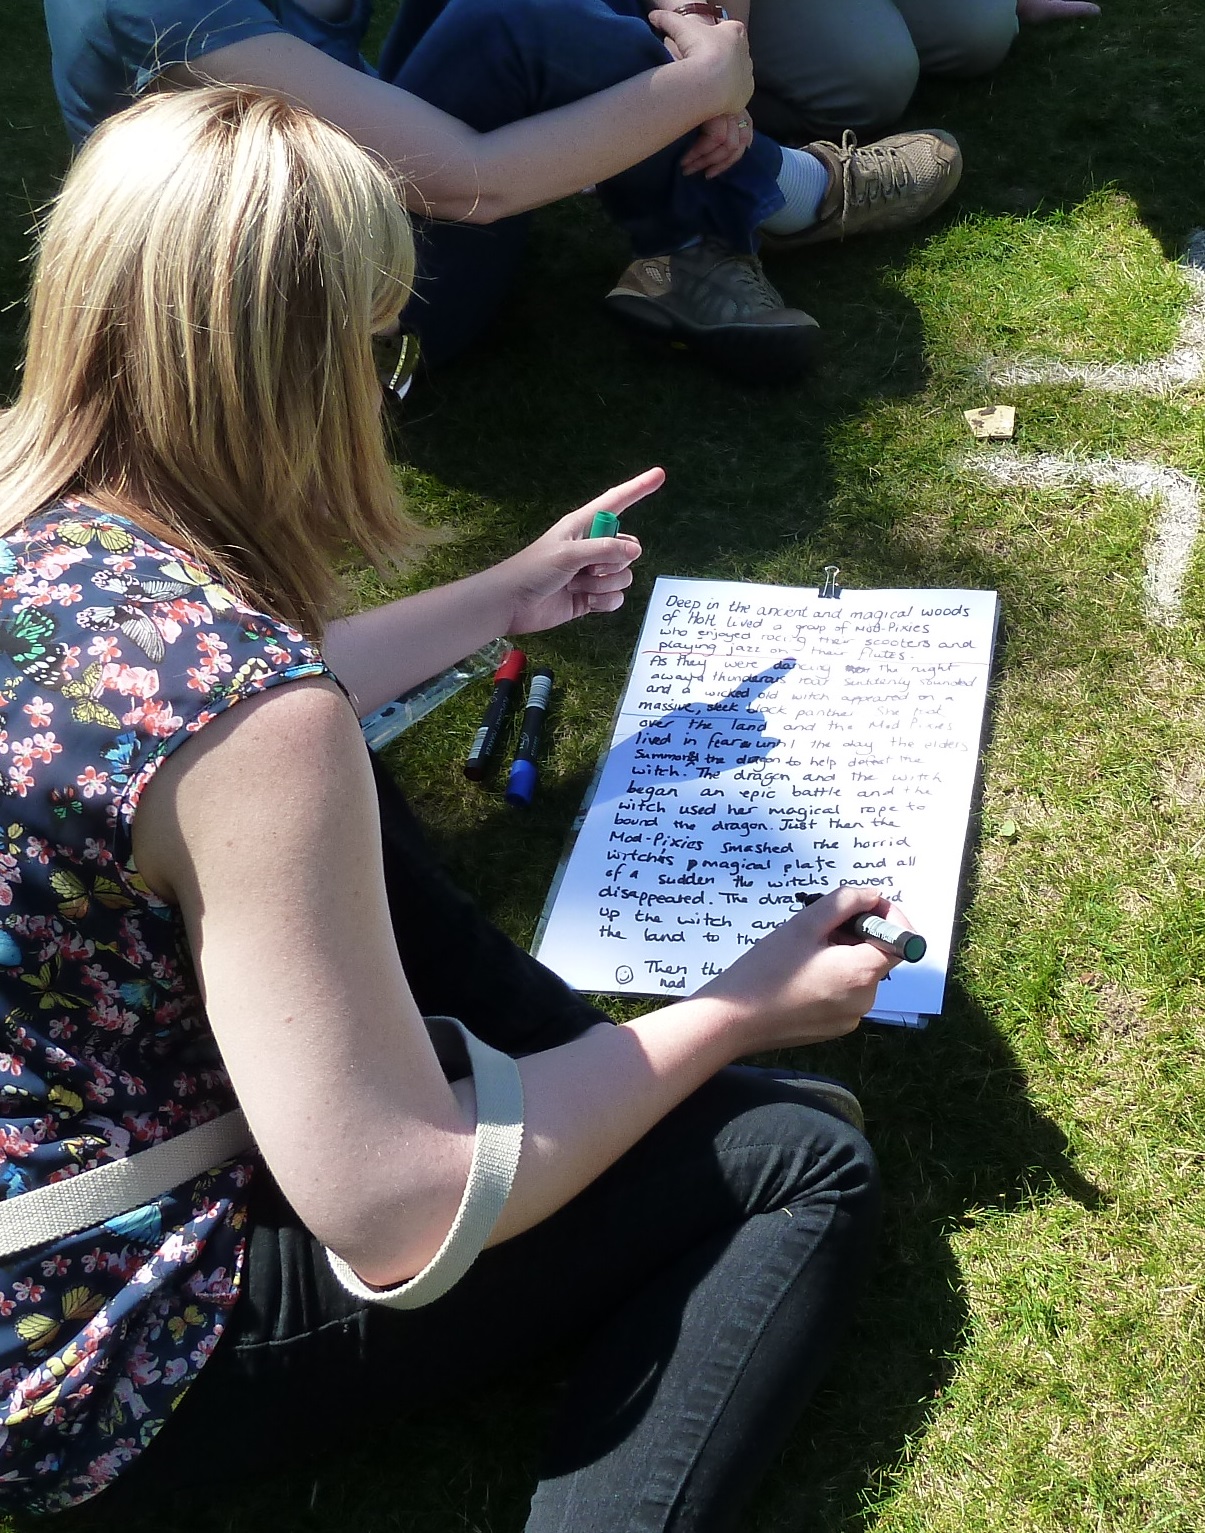 editing stories outdoors (literacy)